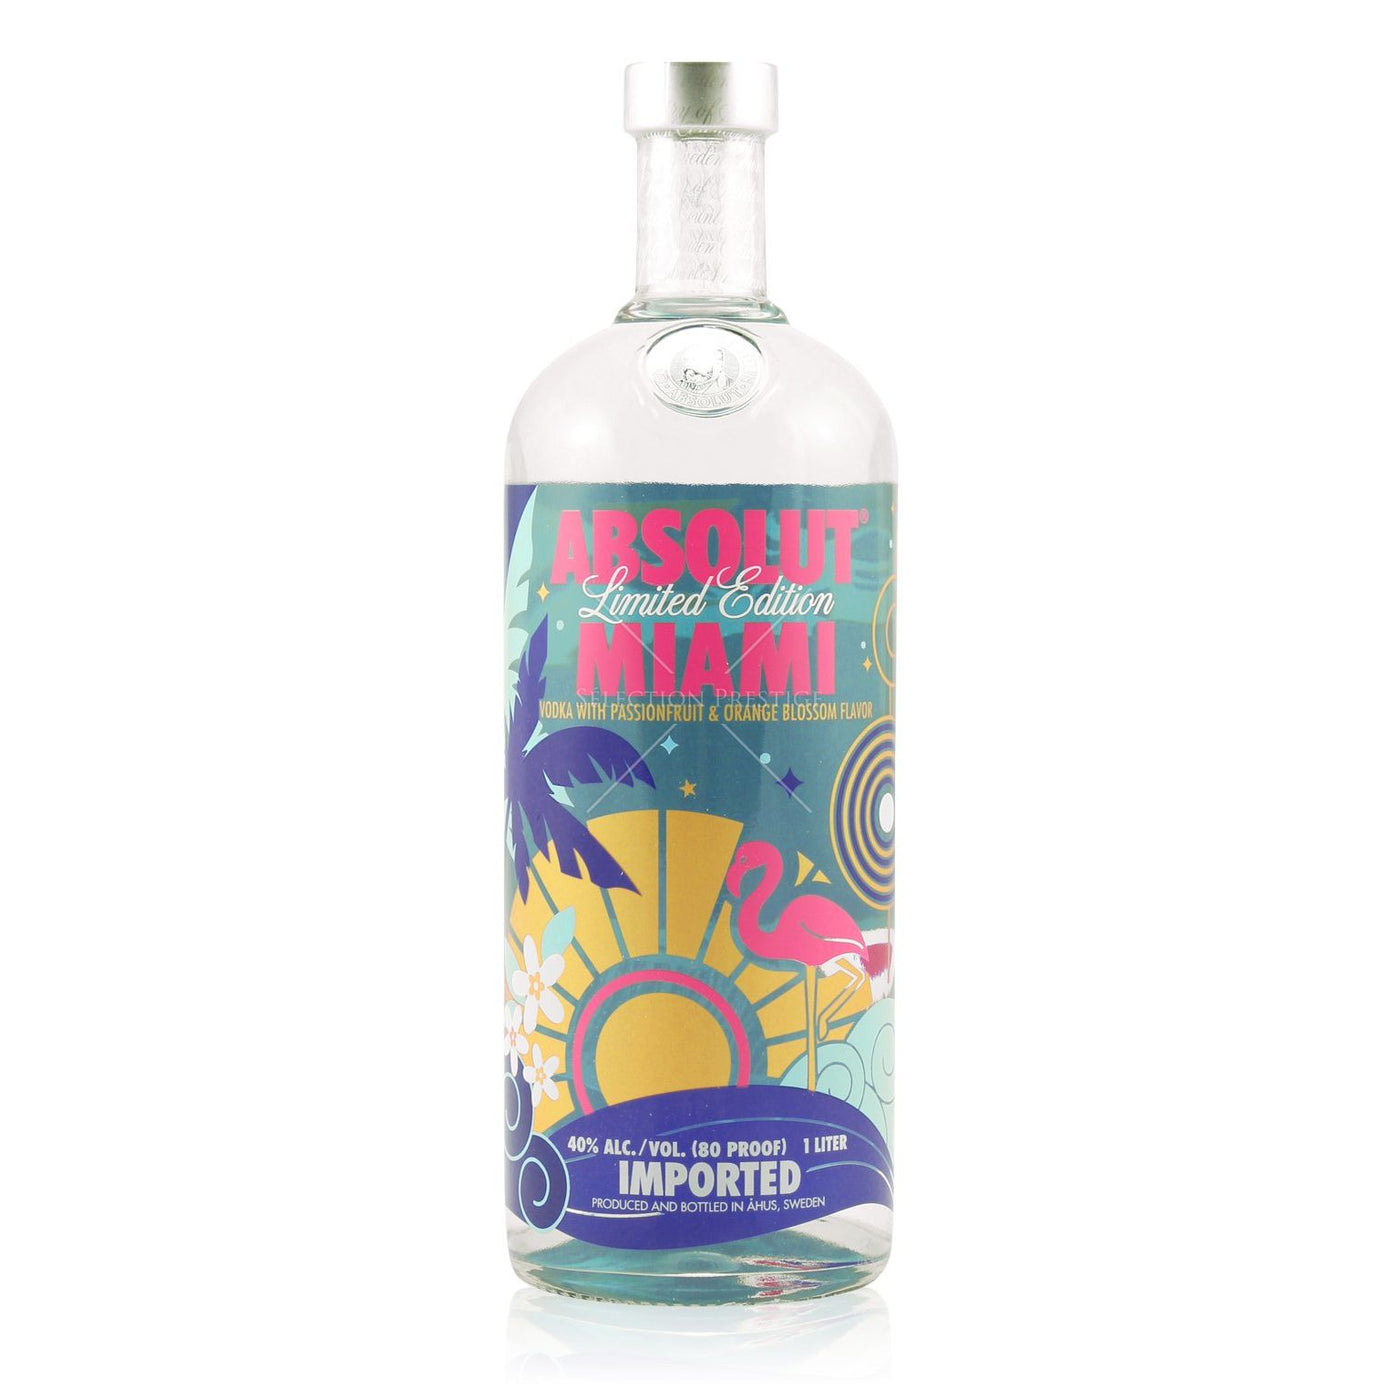 BUY] at Vodka Edition | Miami Limited 1L Absolut